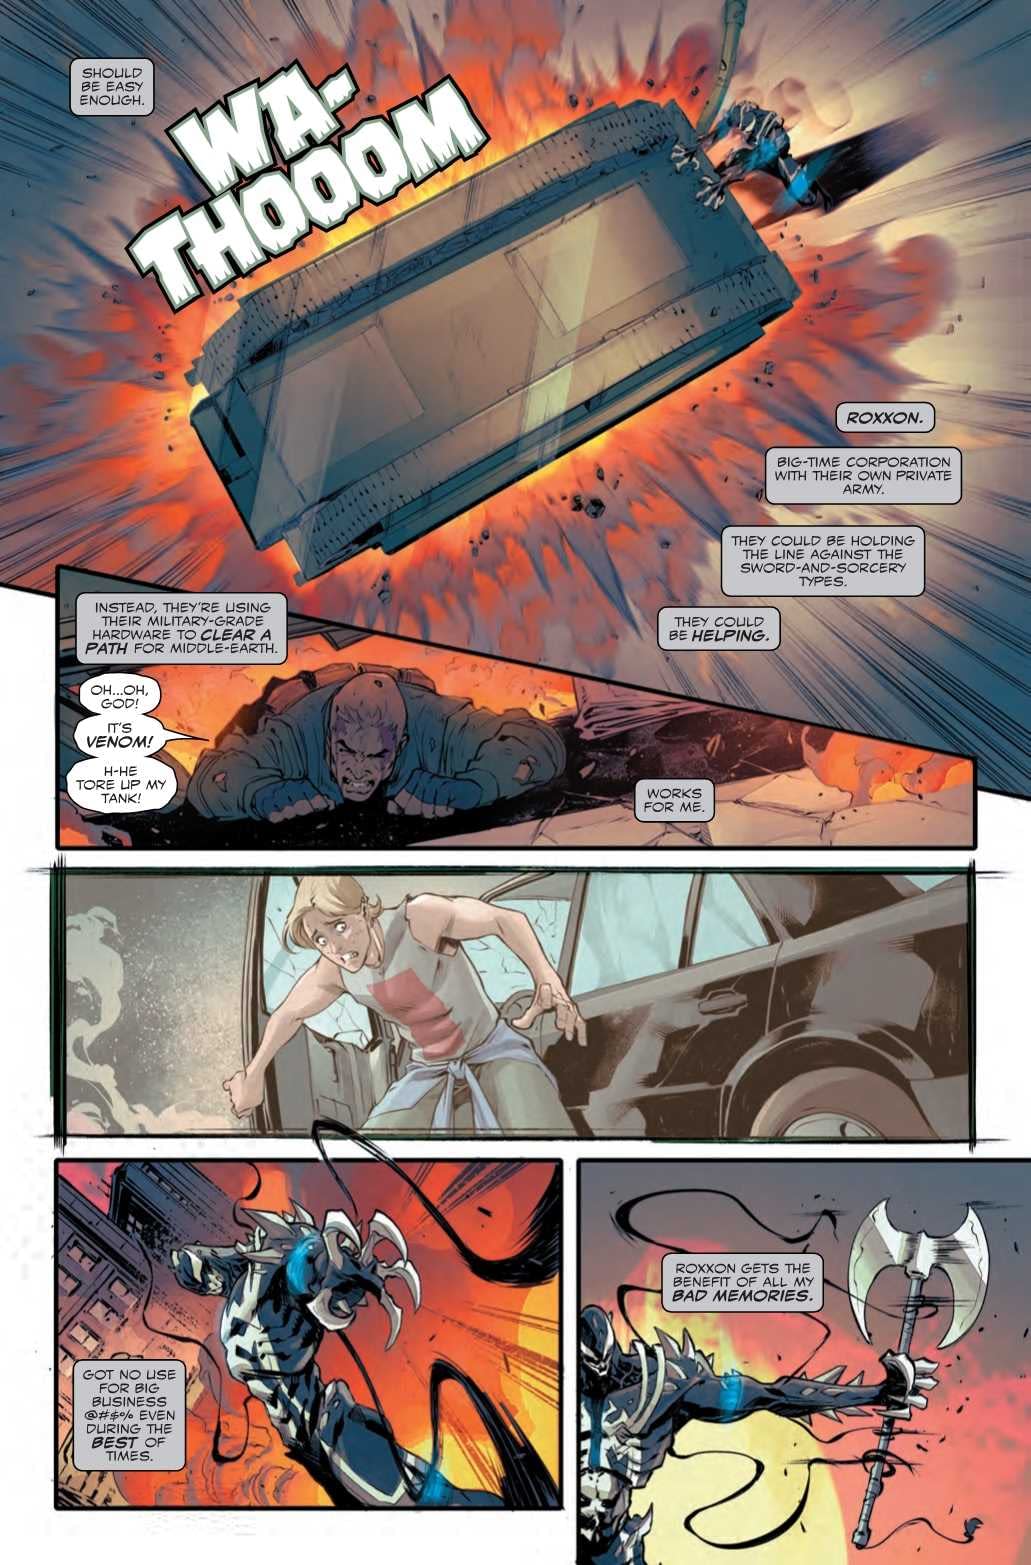 You Wouldn't Like Him When He's Angry (Venom #14 Preview)